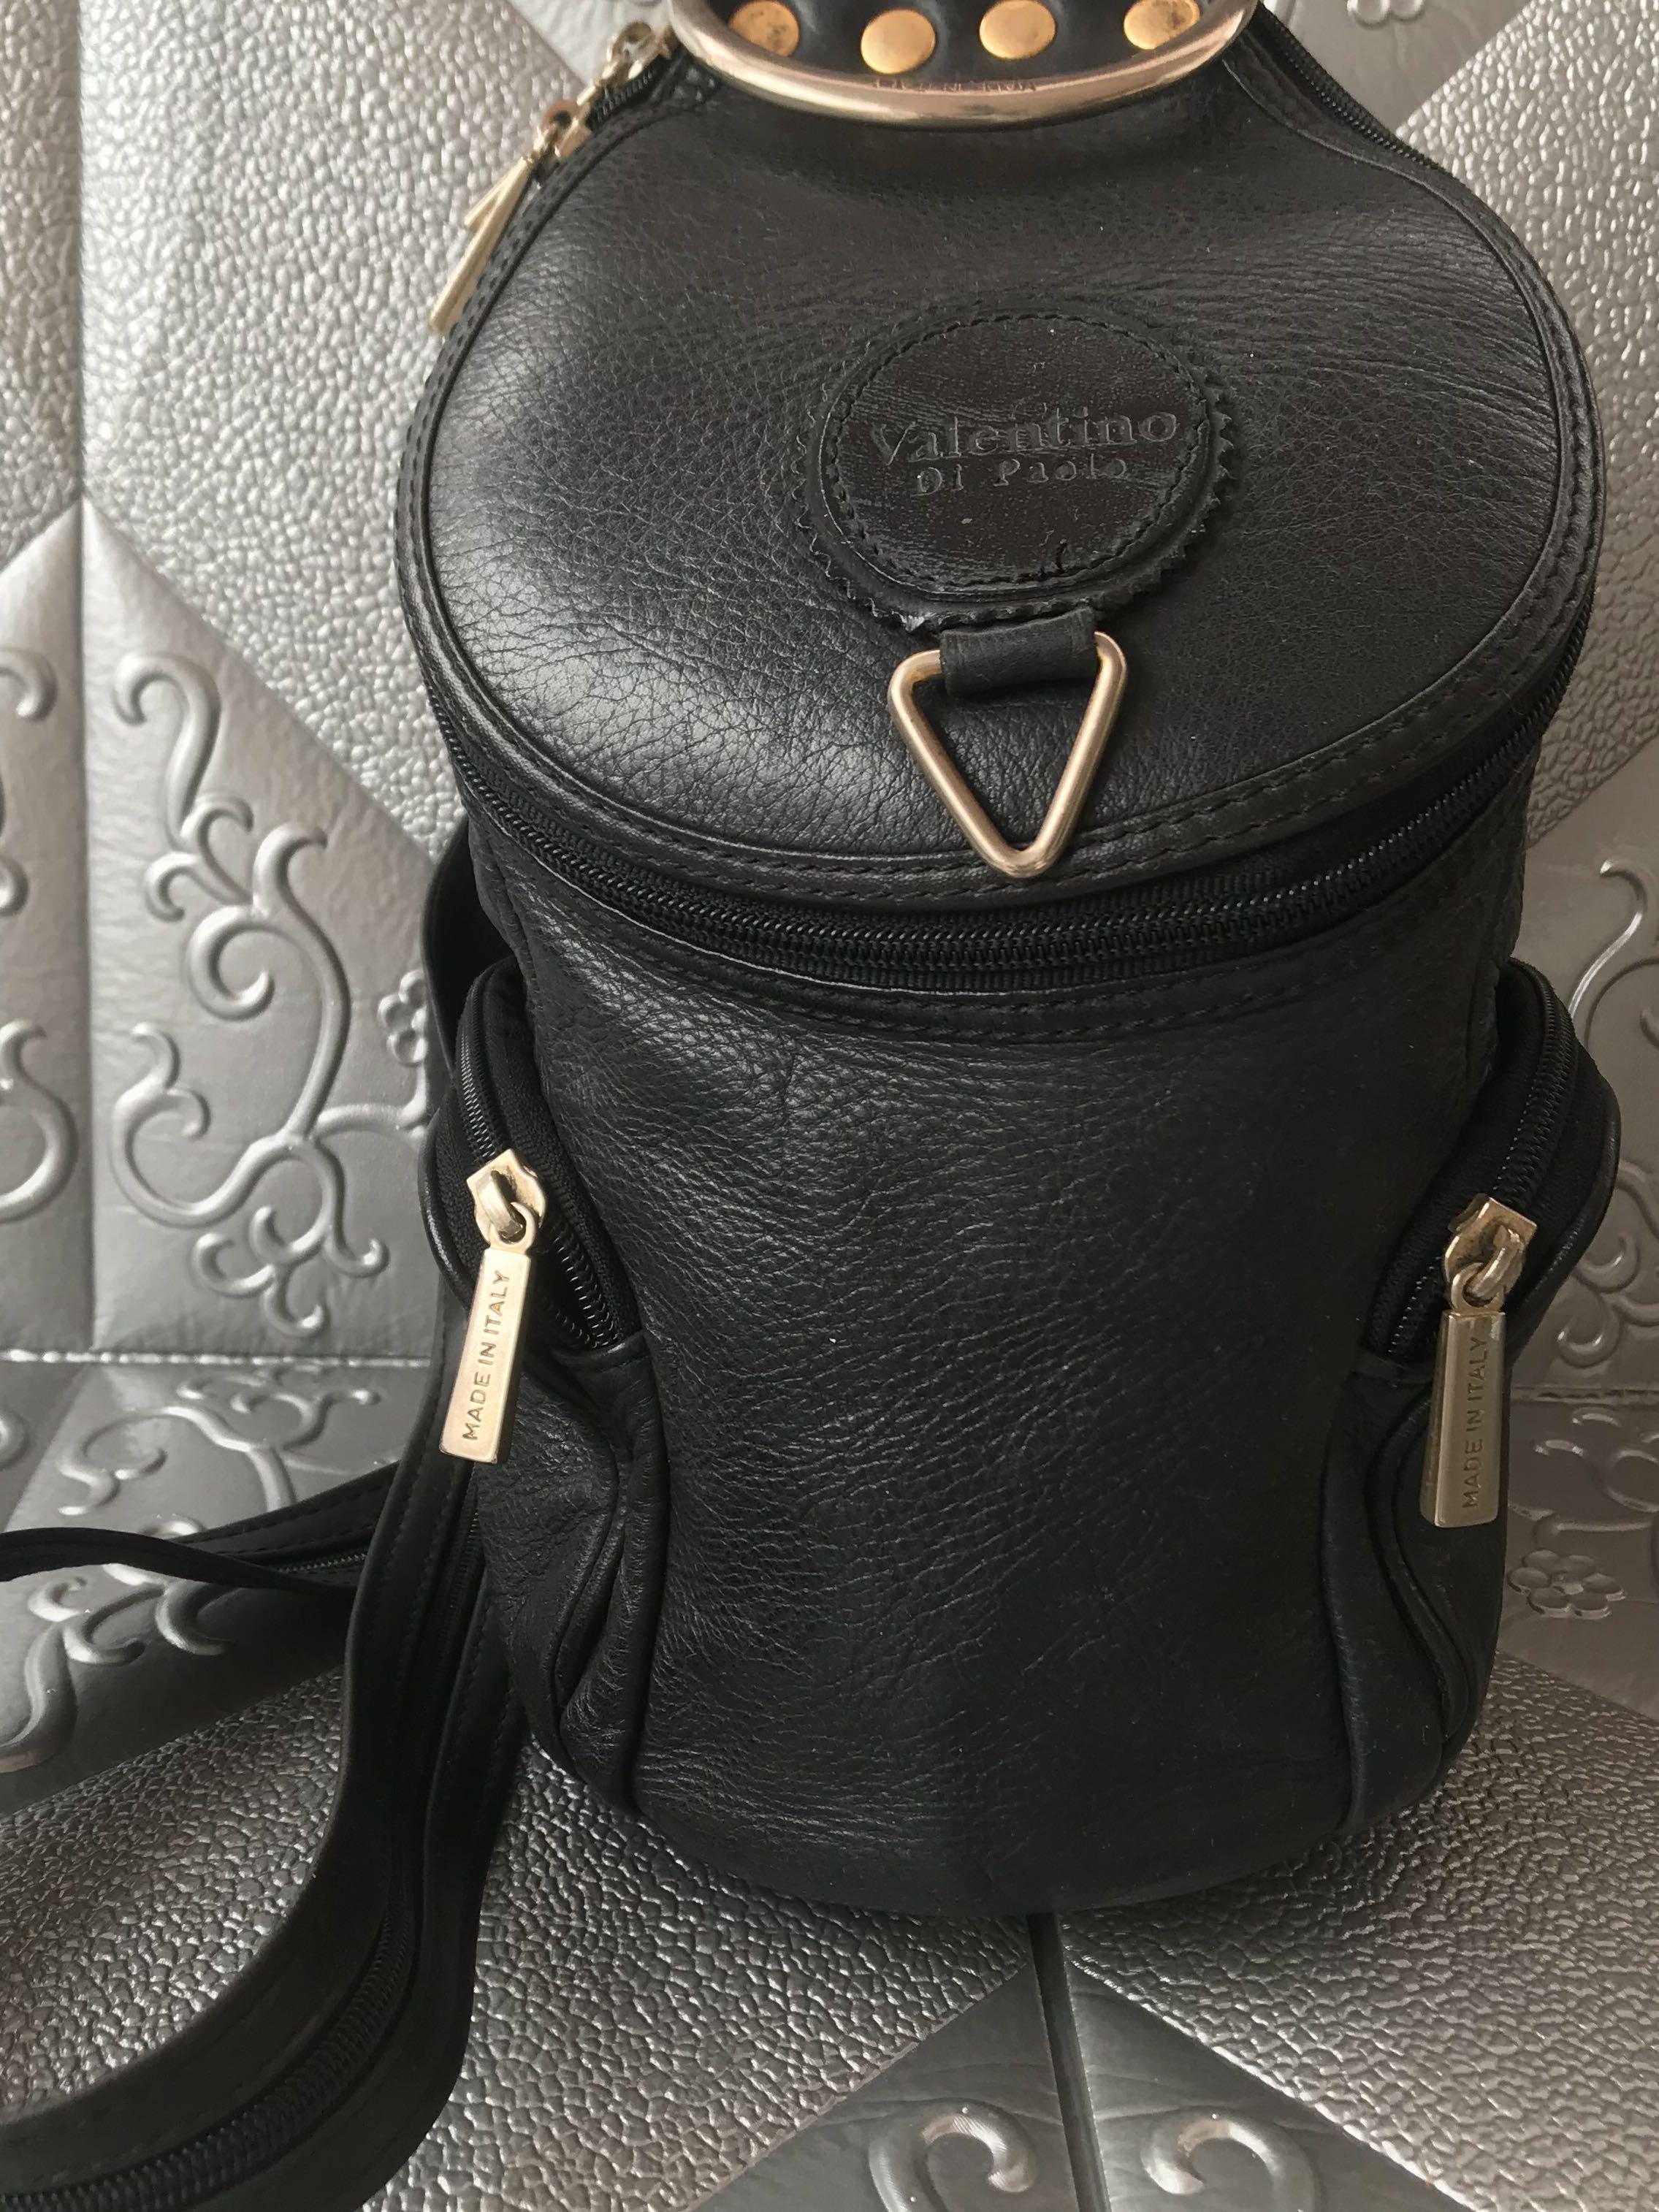 vakuum chance Grusom Valentino di paolo shoulder/ rucksack, Luxury, Bags & Wallets on Carousell